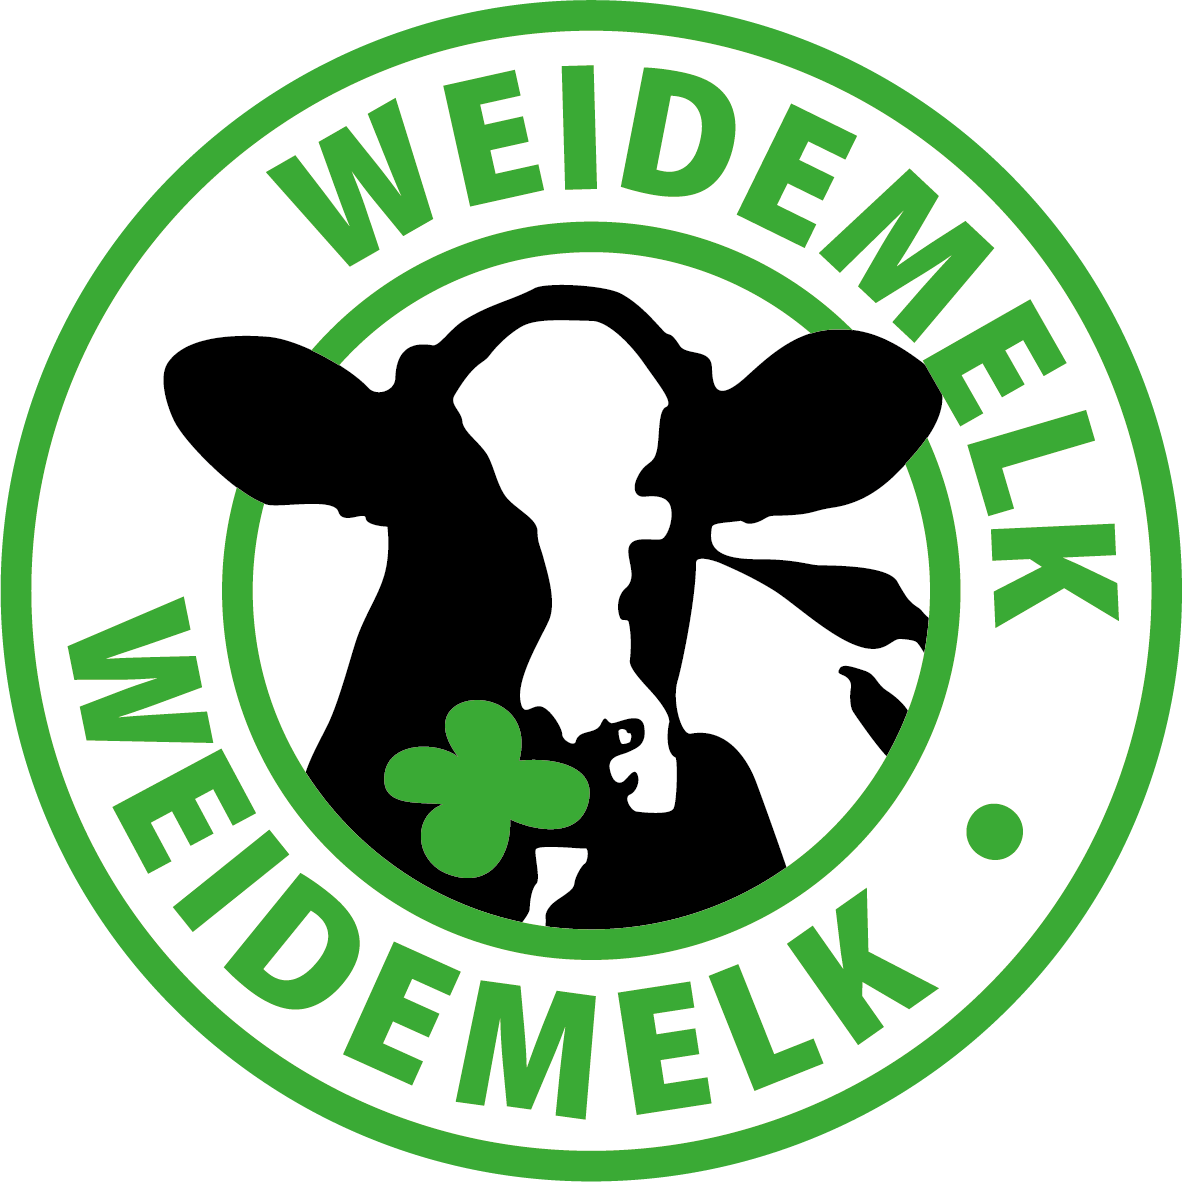 WEIDEMELK certification for dairy products in the Netherlands - WEIDEMELK certification for dairy products in the Netherlands